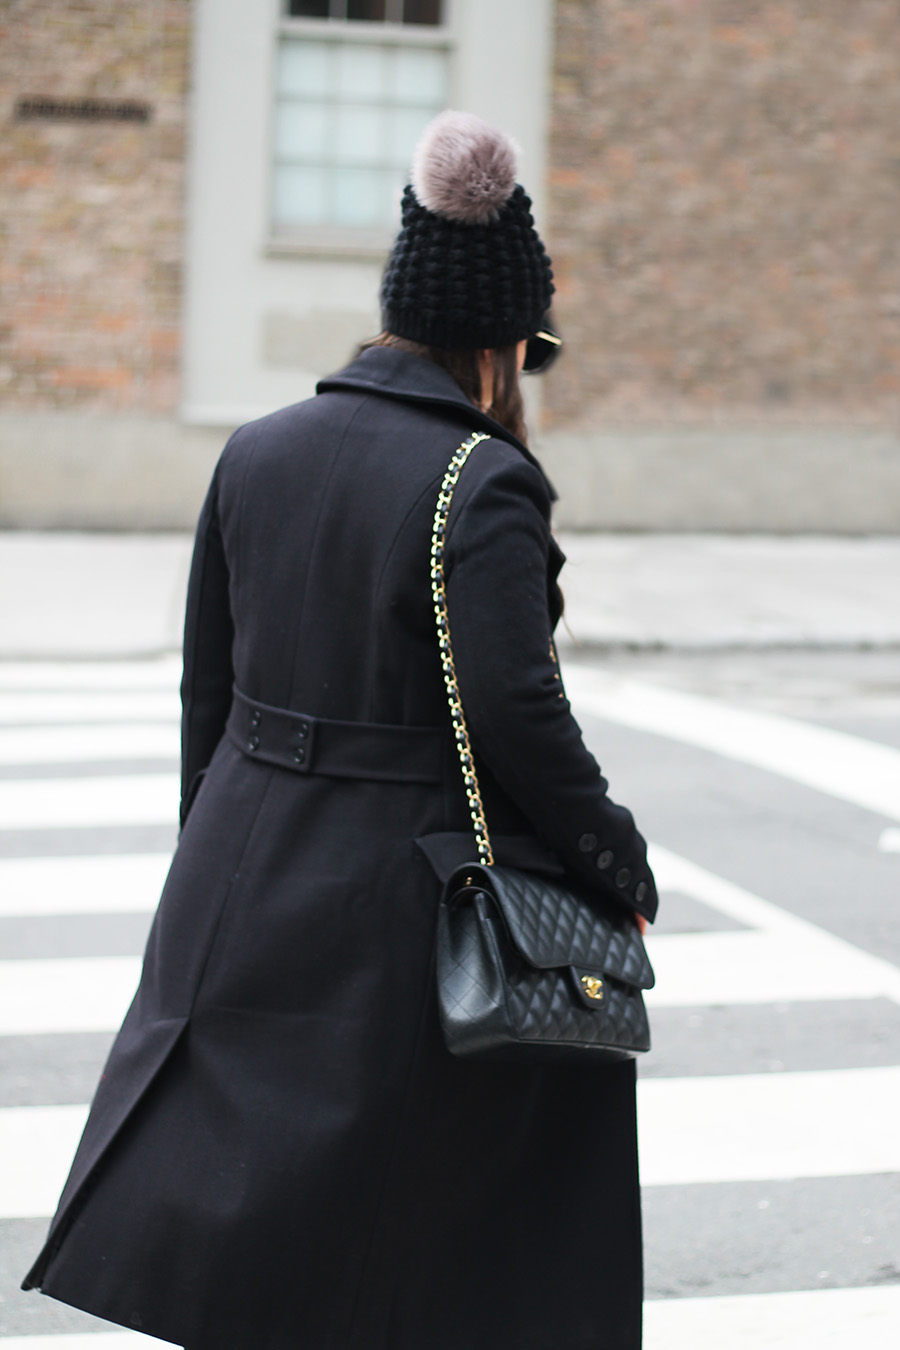 Black-Long-Coat-Chanel-Handbag-Outfit-Ideas-Inspiration - A Side Of Style